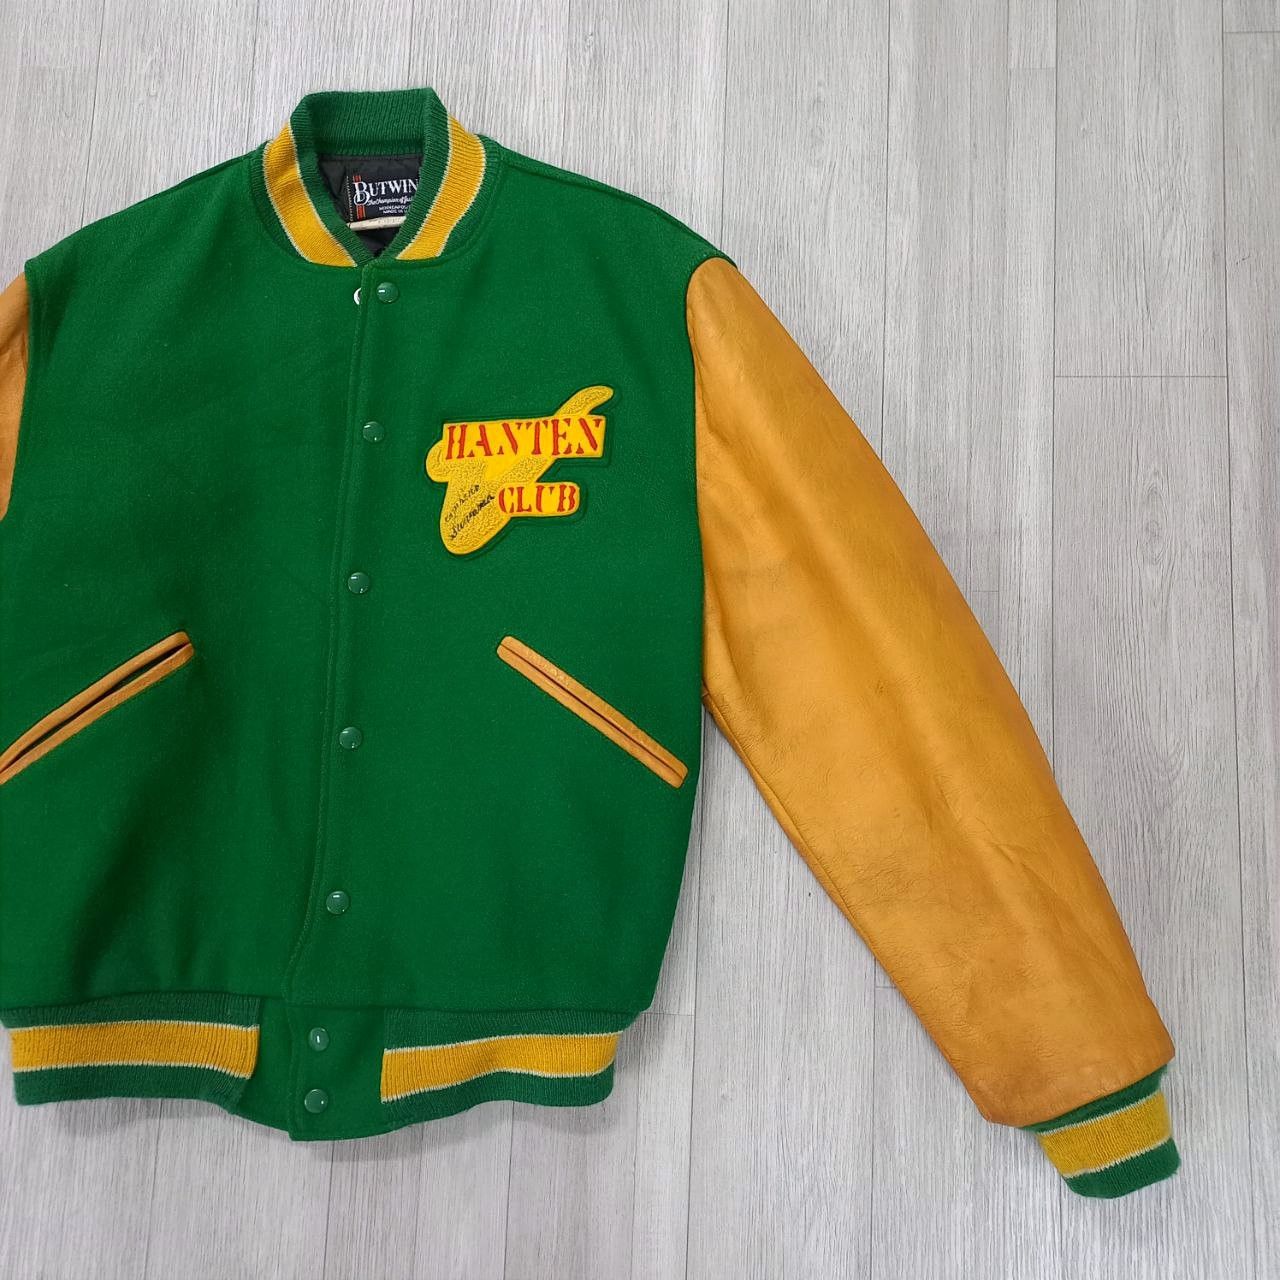 Union Made - HANTEN CLUB 1984 by BUTWIN USA Wool Leather Varsity Jacket - 10